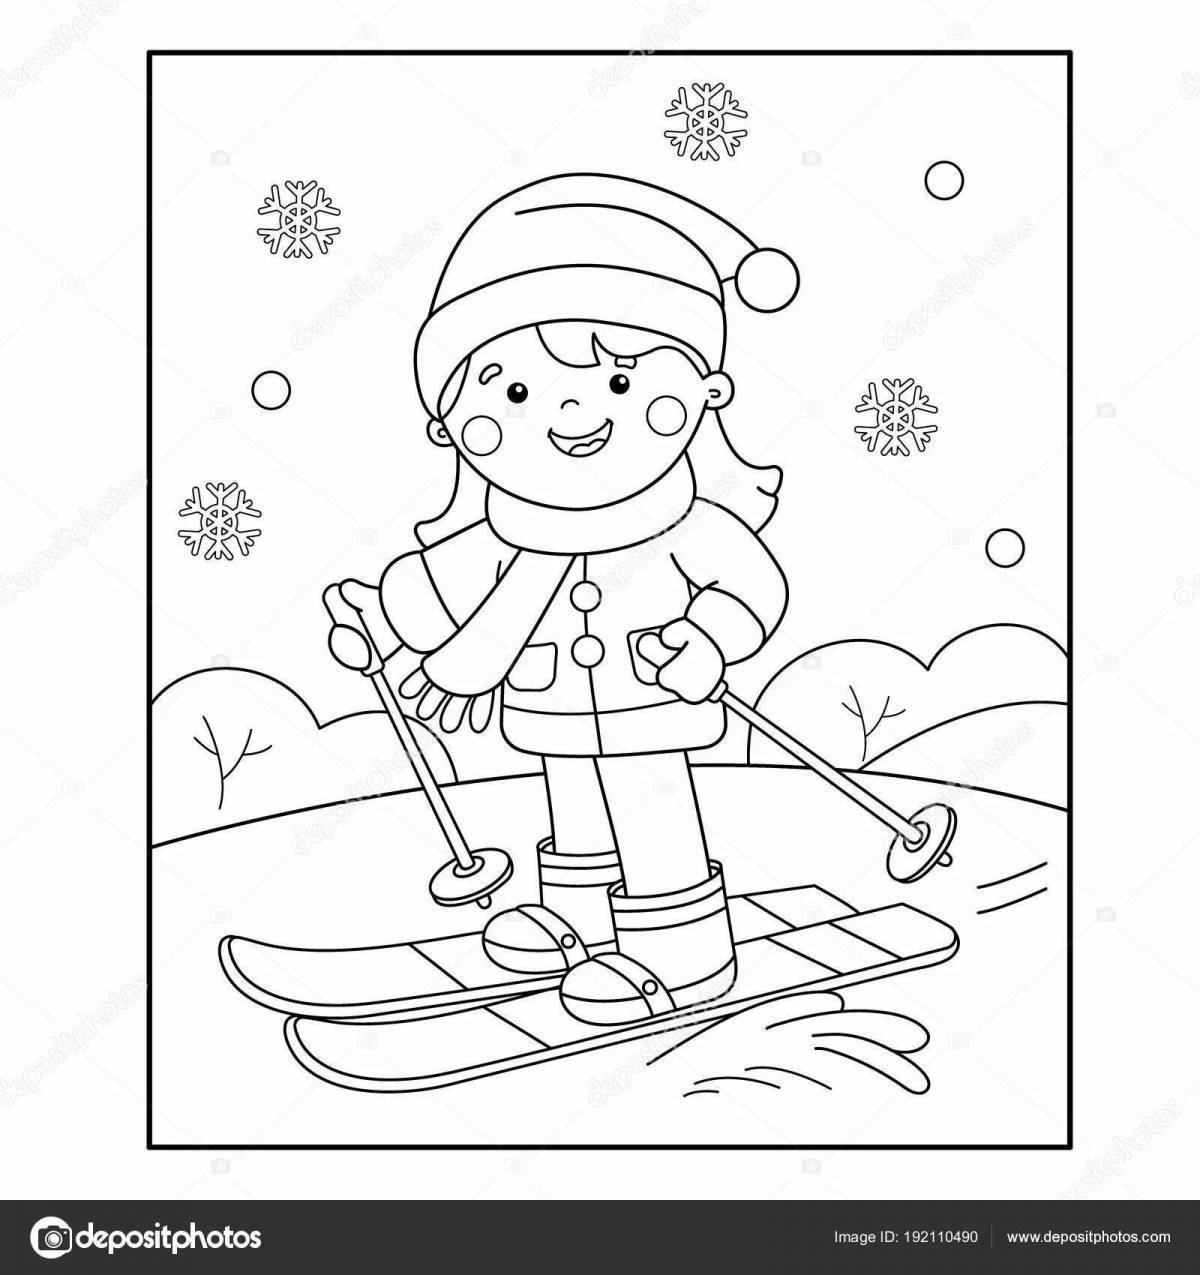 Animated dhow winter sports coloring book